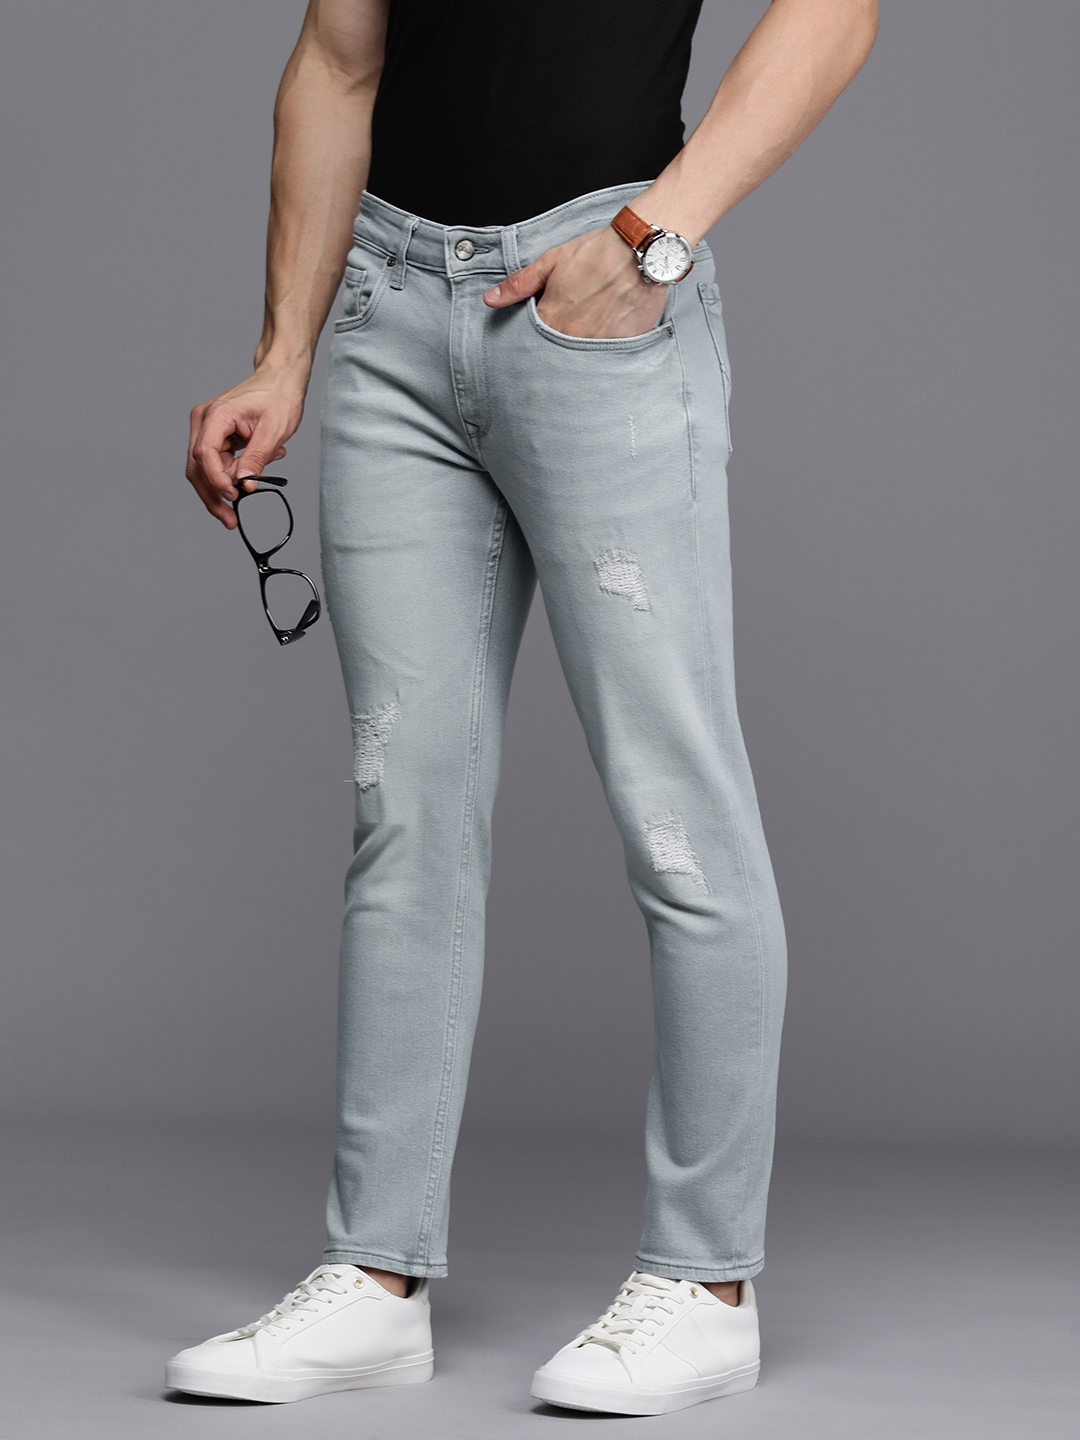 Louis Philippe Jeans Jeans : Buy Louis Philippe Jeans Grey Jeans